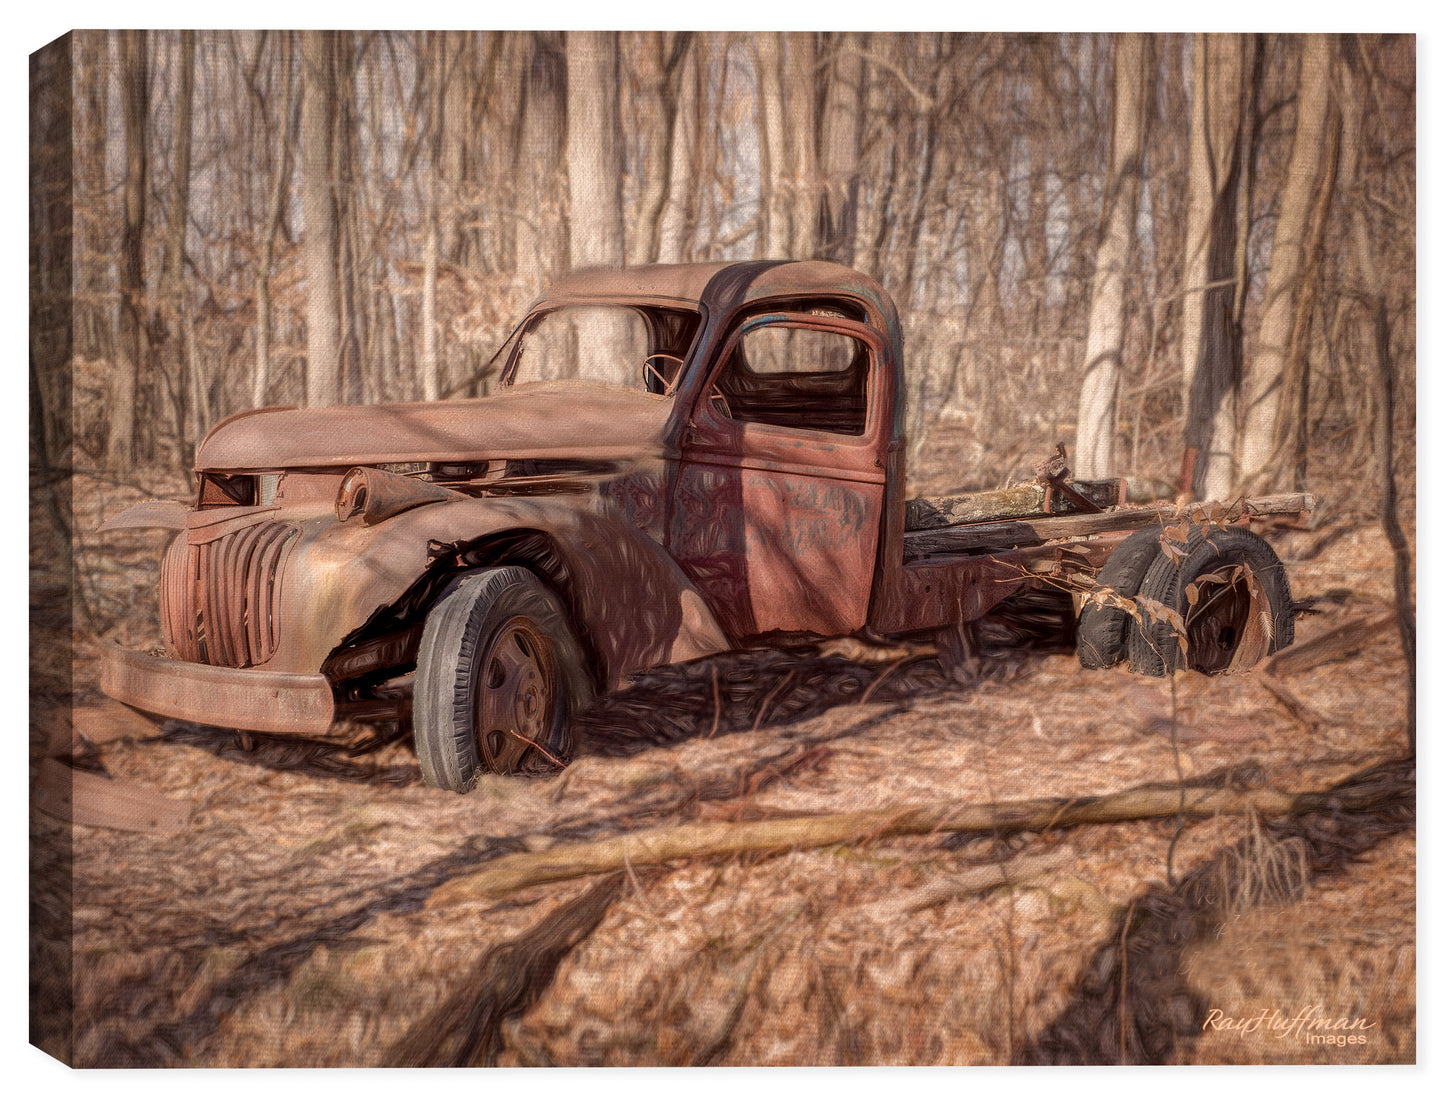 Abandoned - Vintage Truck deep in the Woods